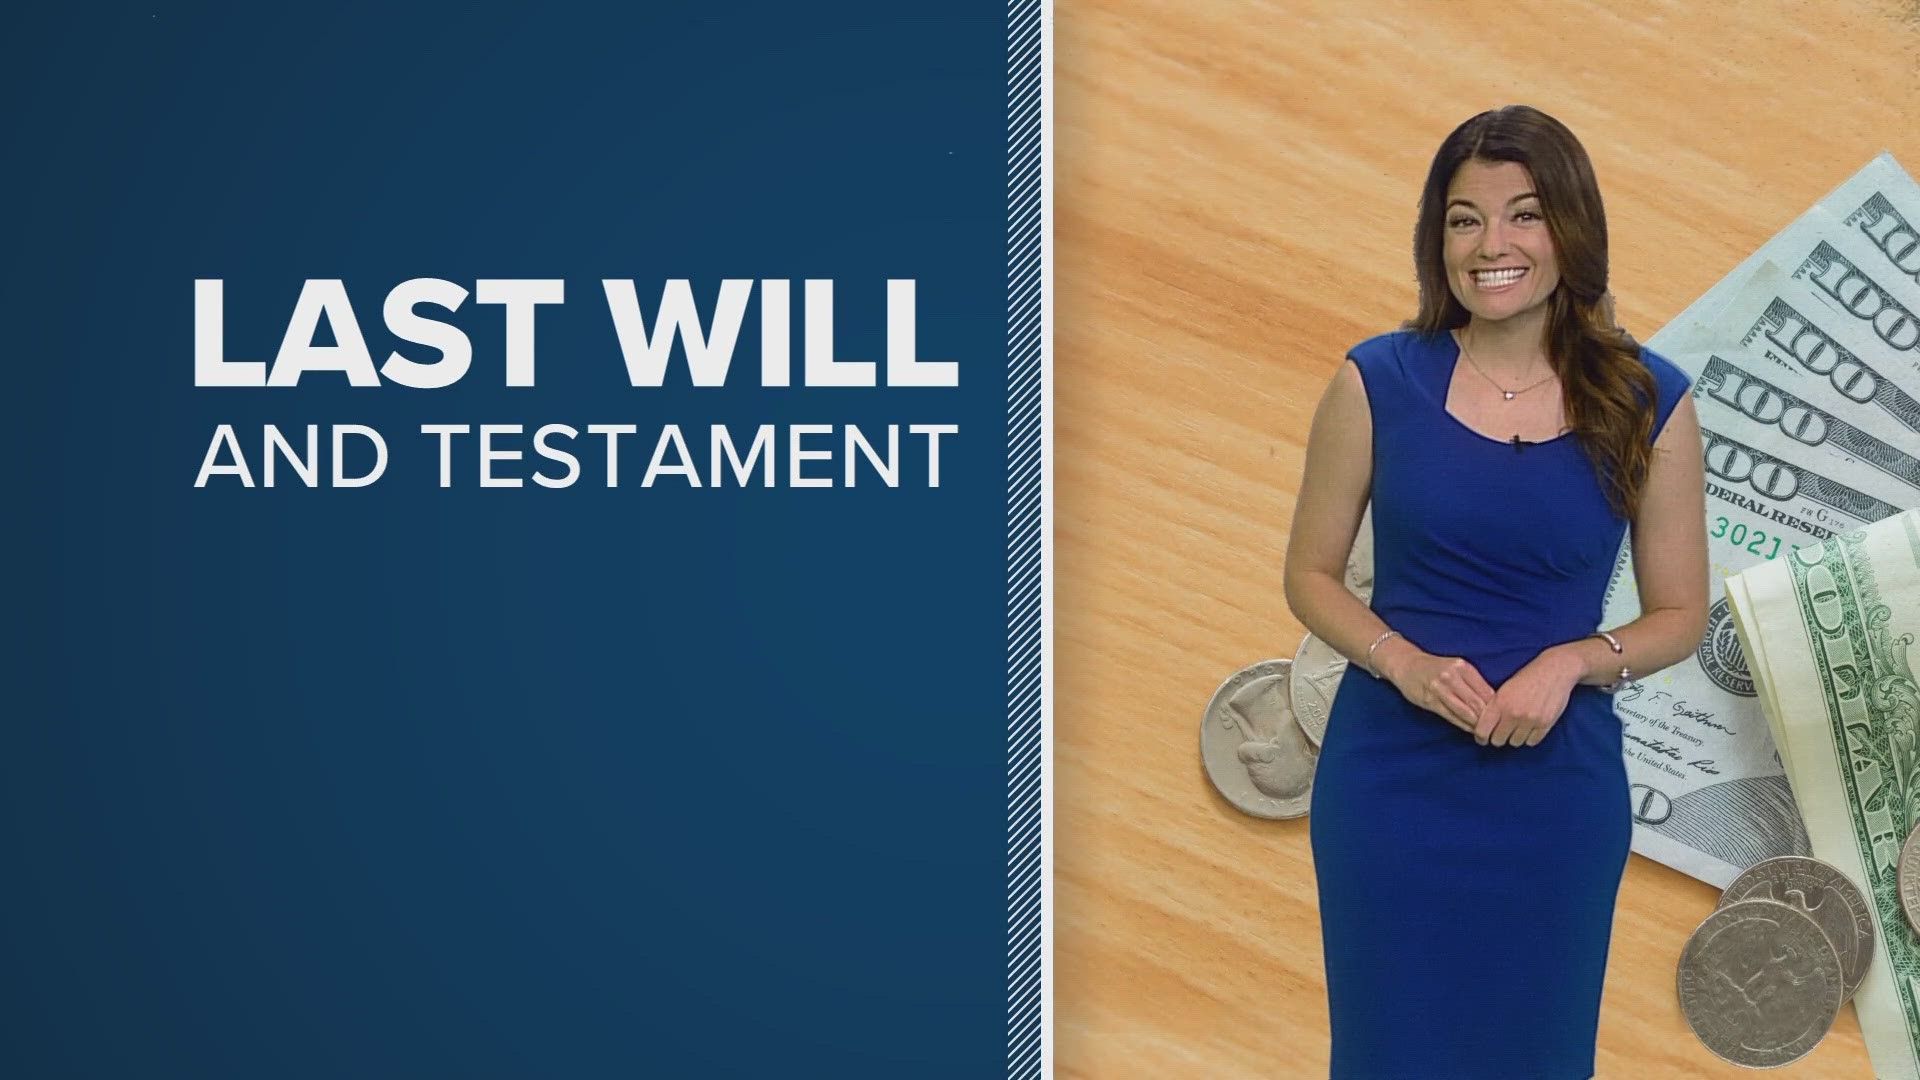 Allison Gormly tells us the deal with making a will.